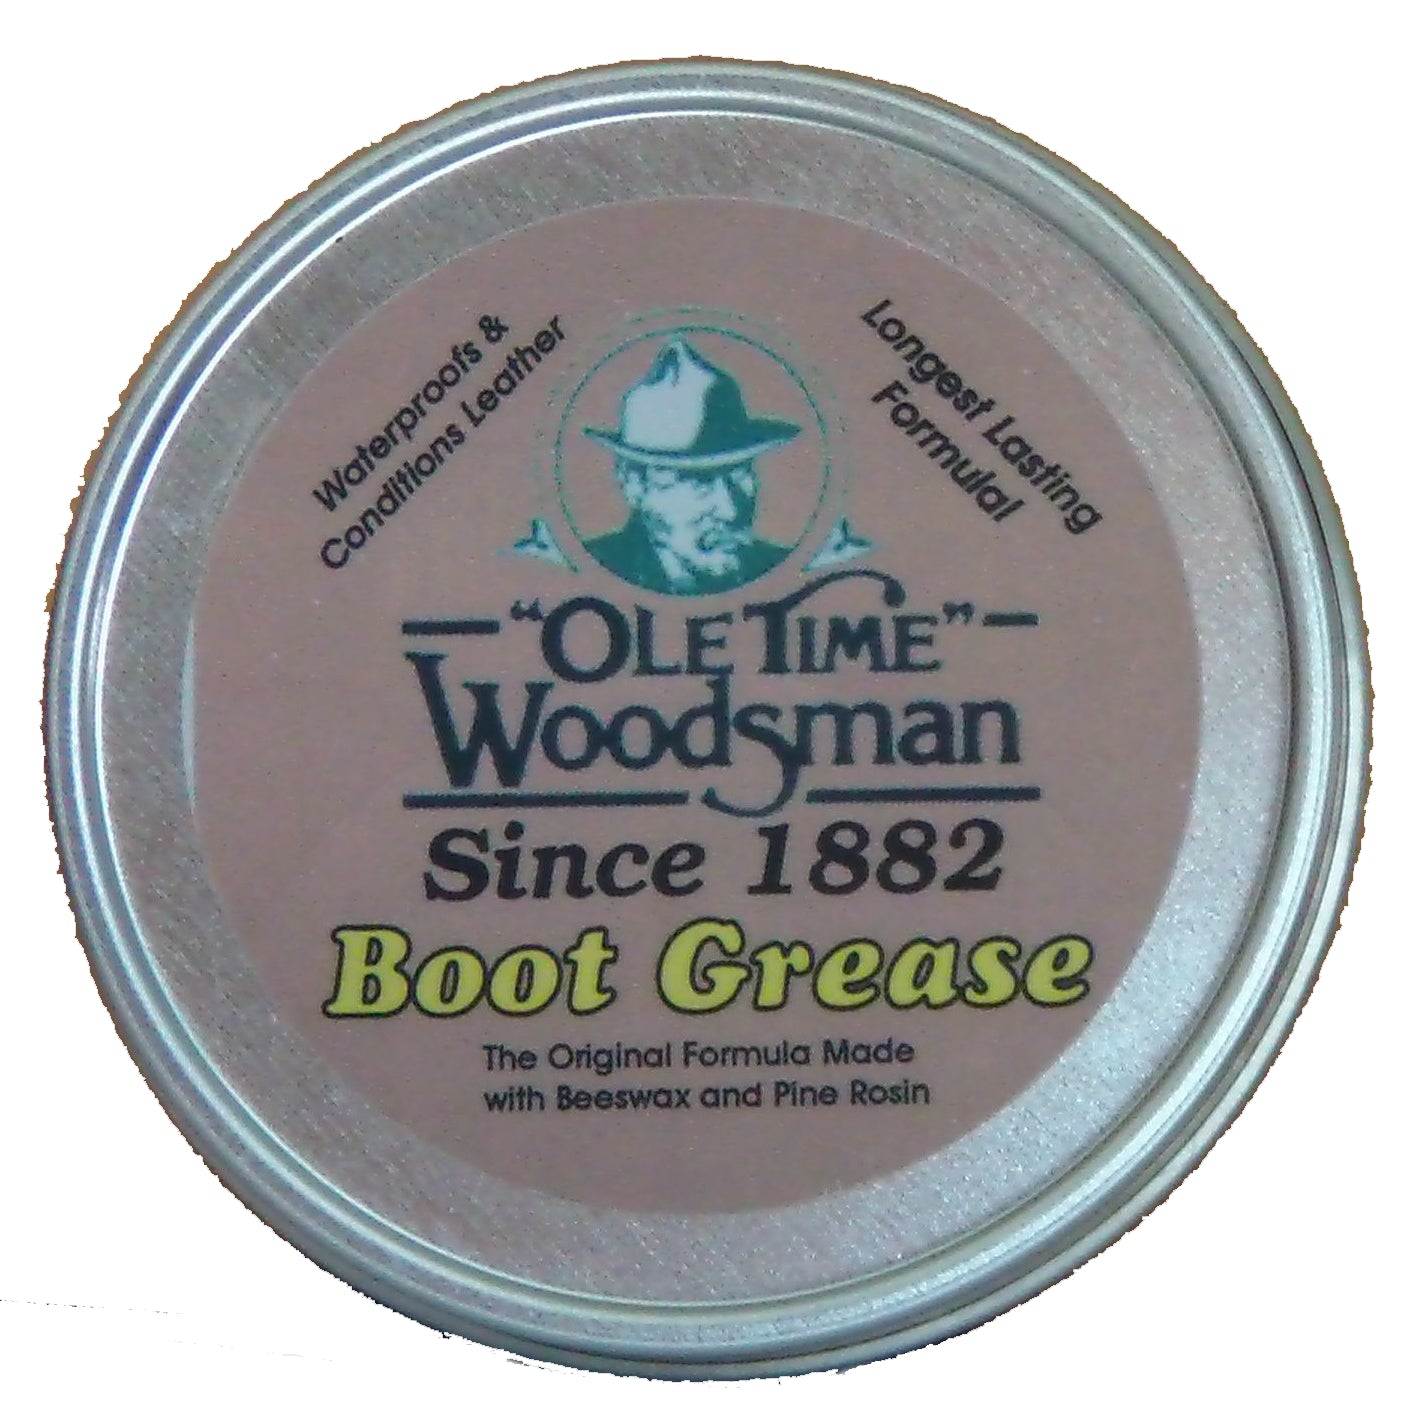 Ole Time Woodsman Oilskin WAX. The Original 1800's Formula for Waterproofing Canvas and Cotton Outer Garments